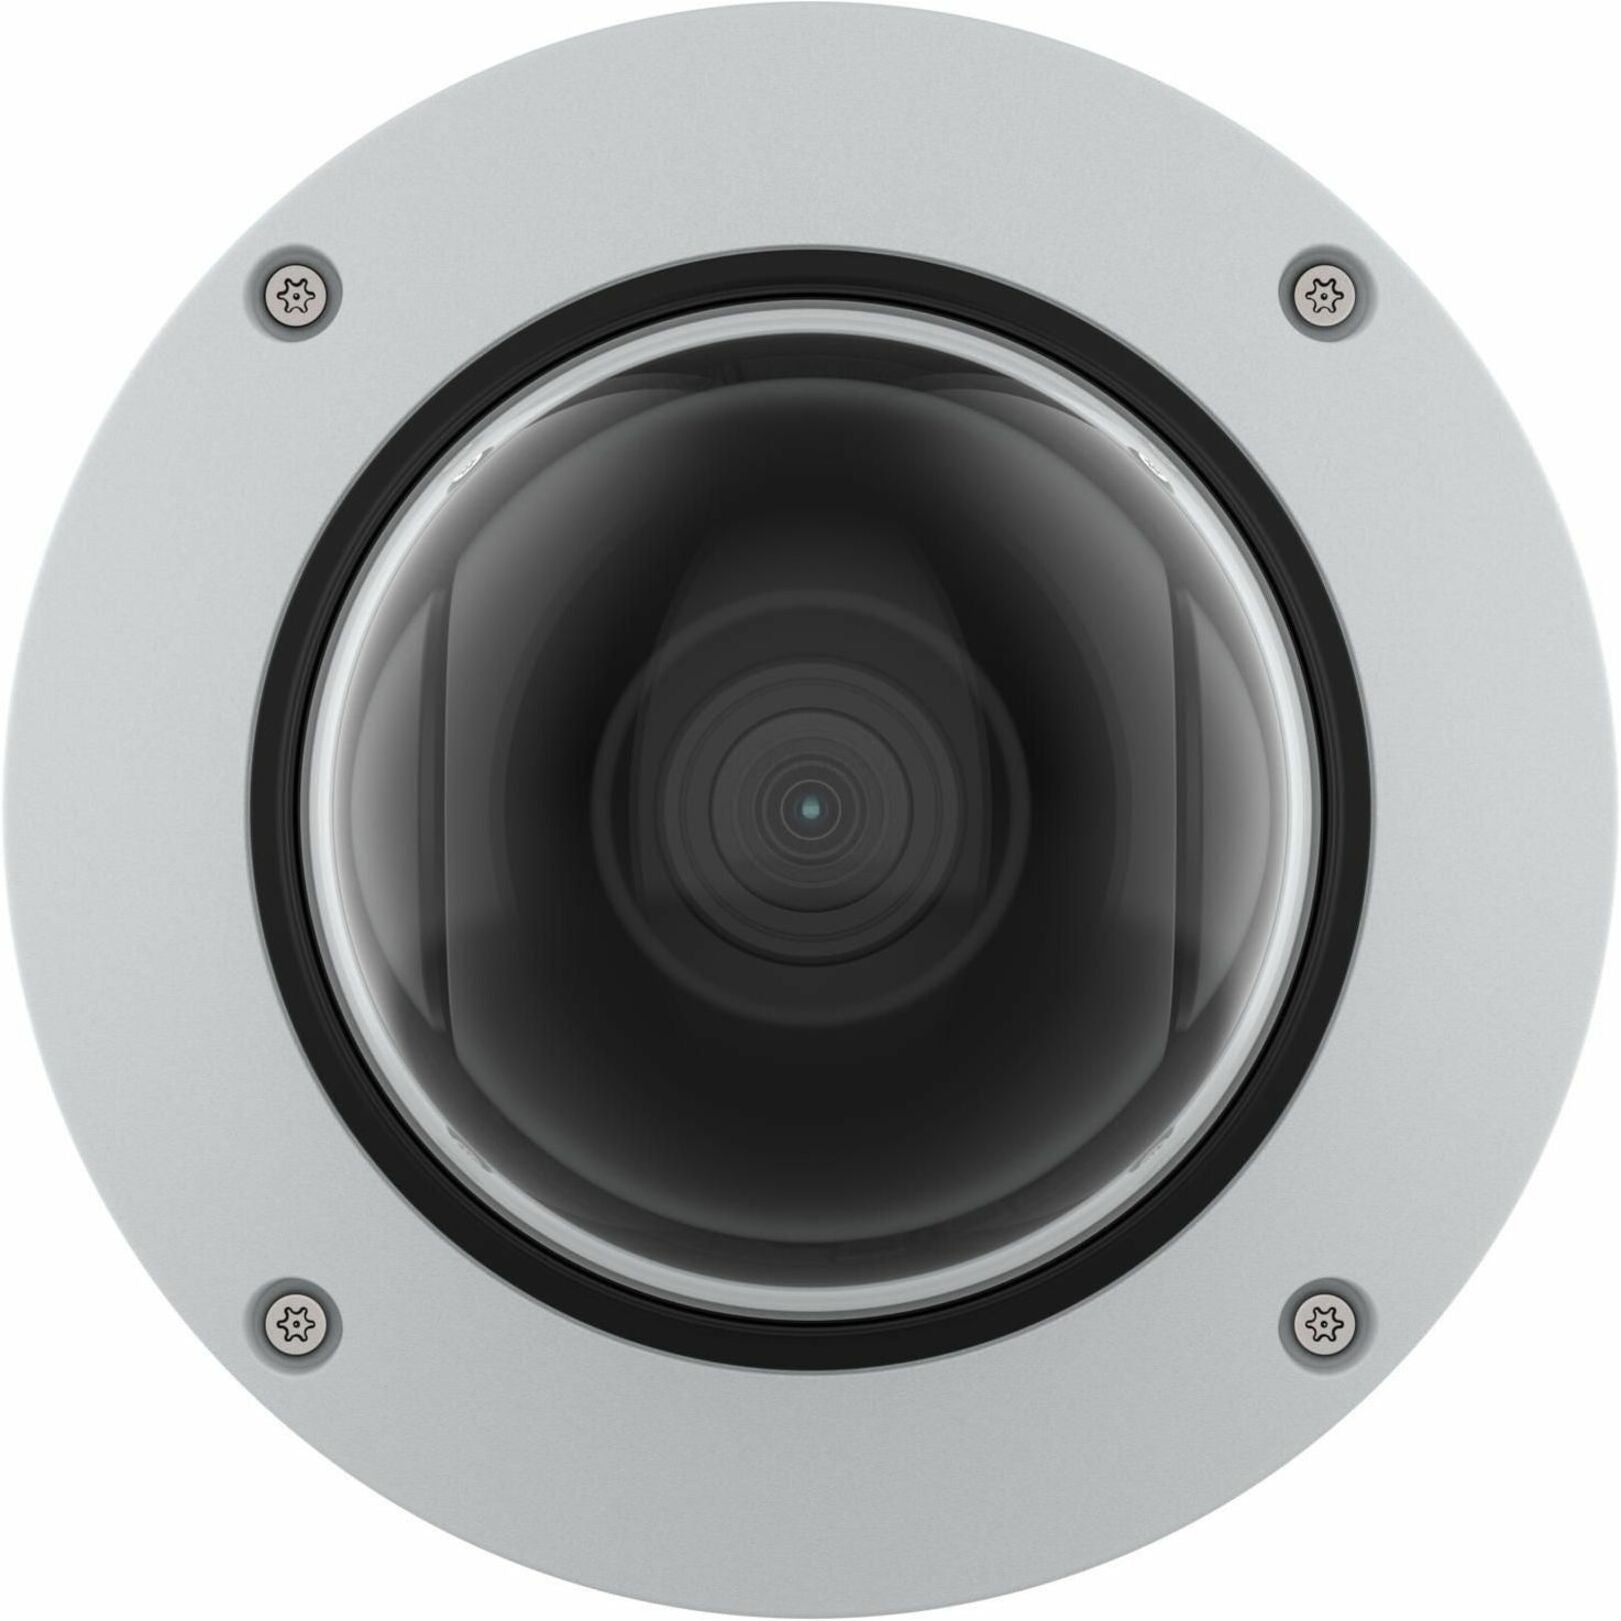 AXIS 02617-004 Q3628-VE Dome Camera, 8MP, 4K Video, Varifocal Lens, Outdoor, 5 Year Warranty